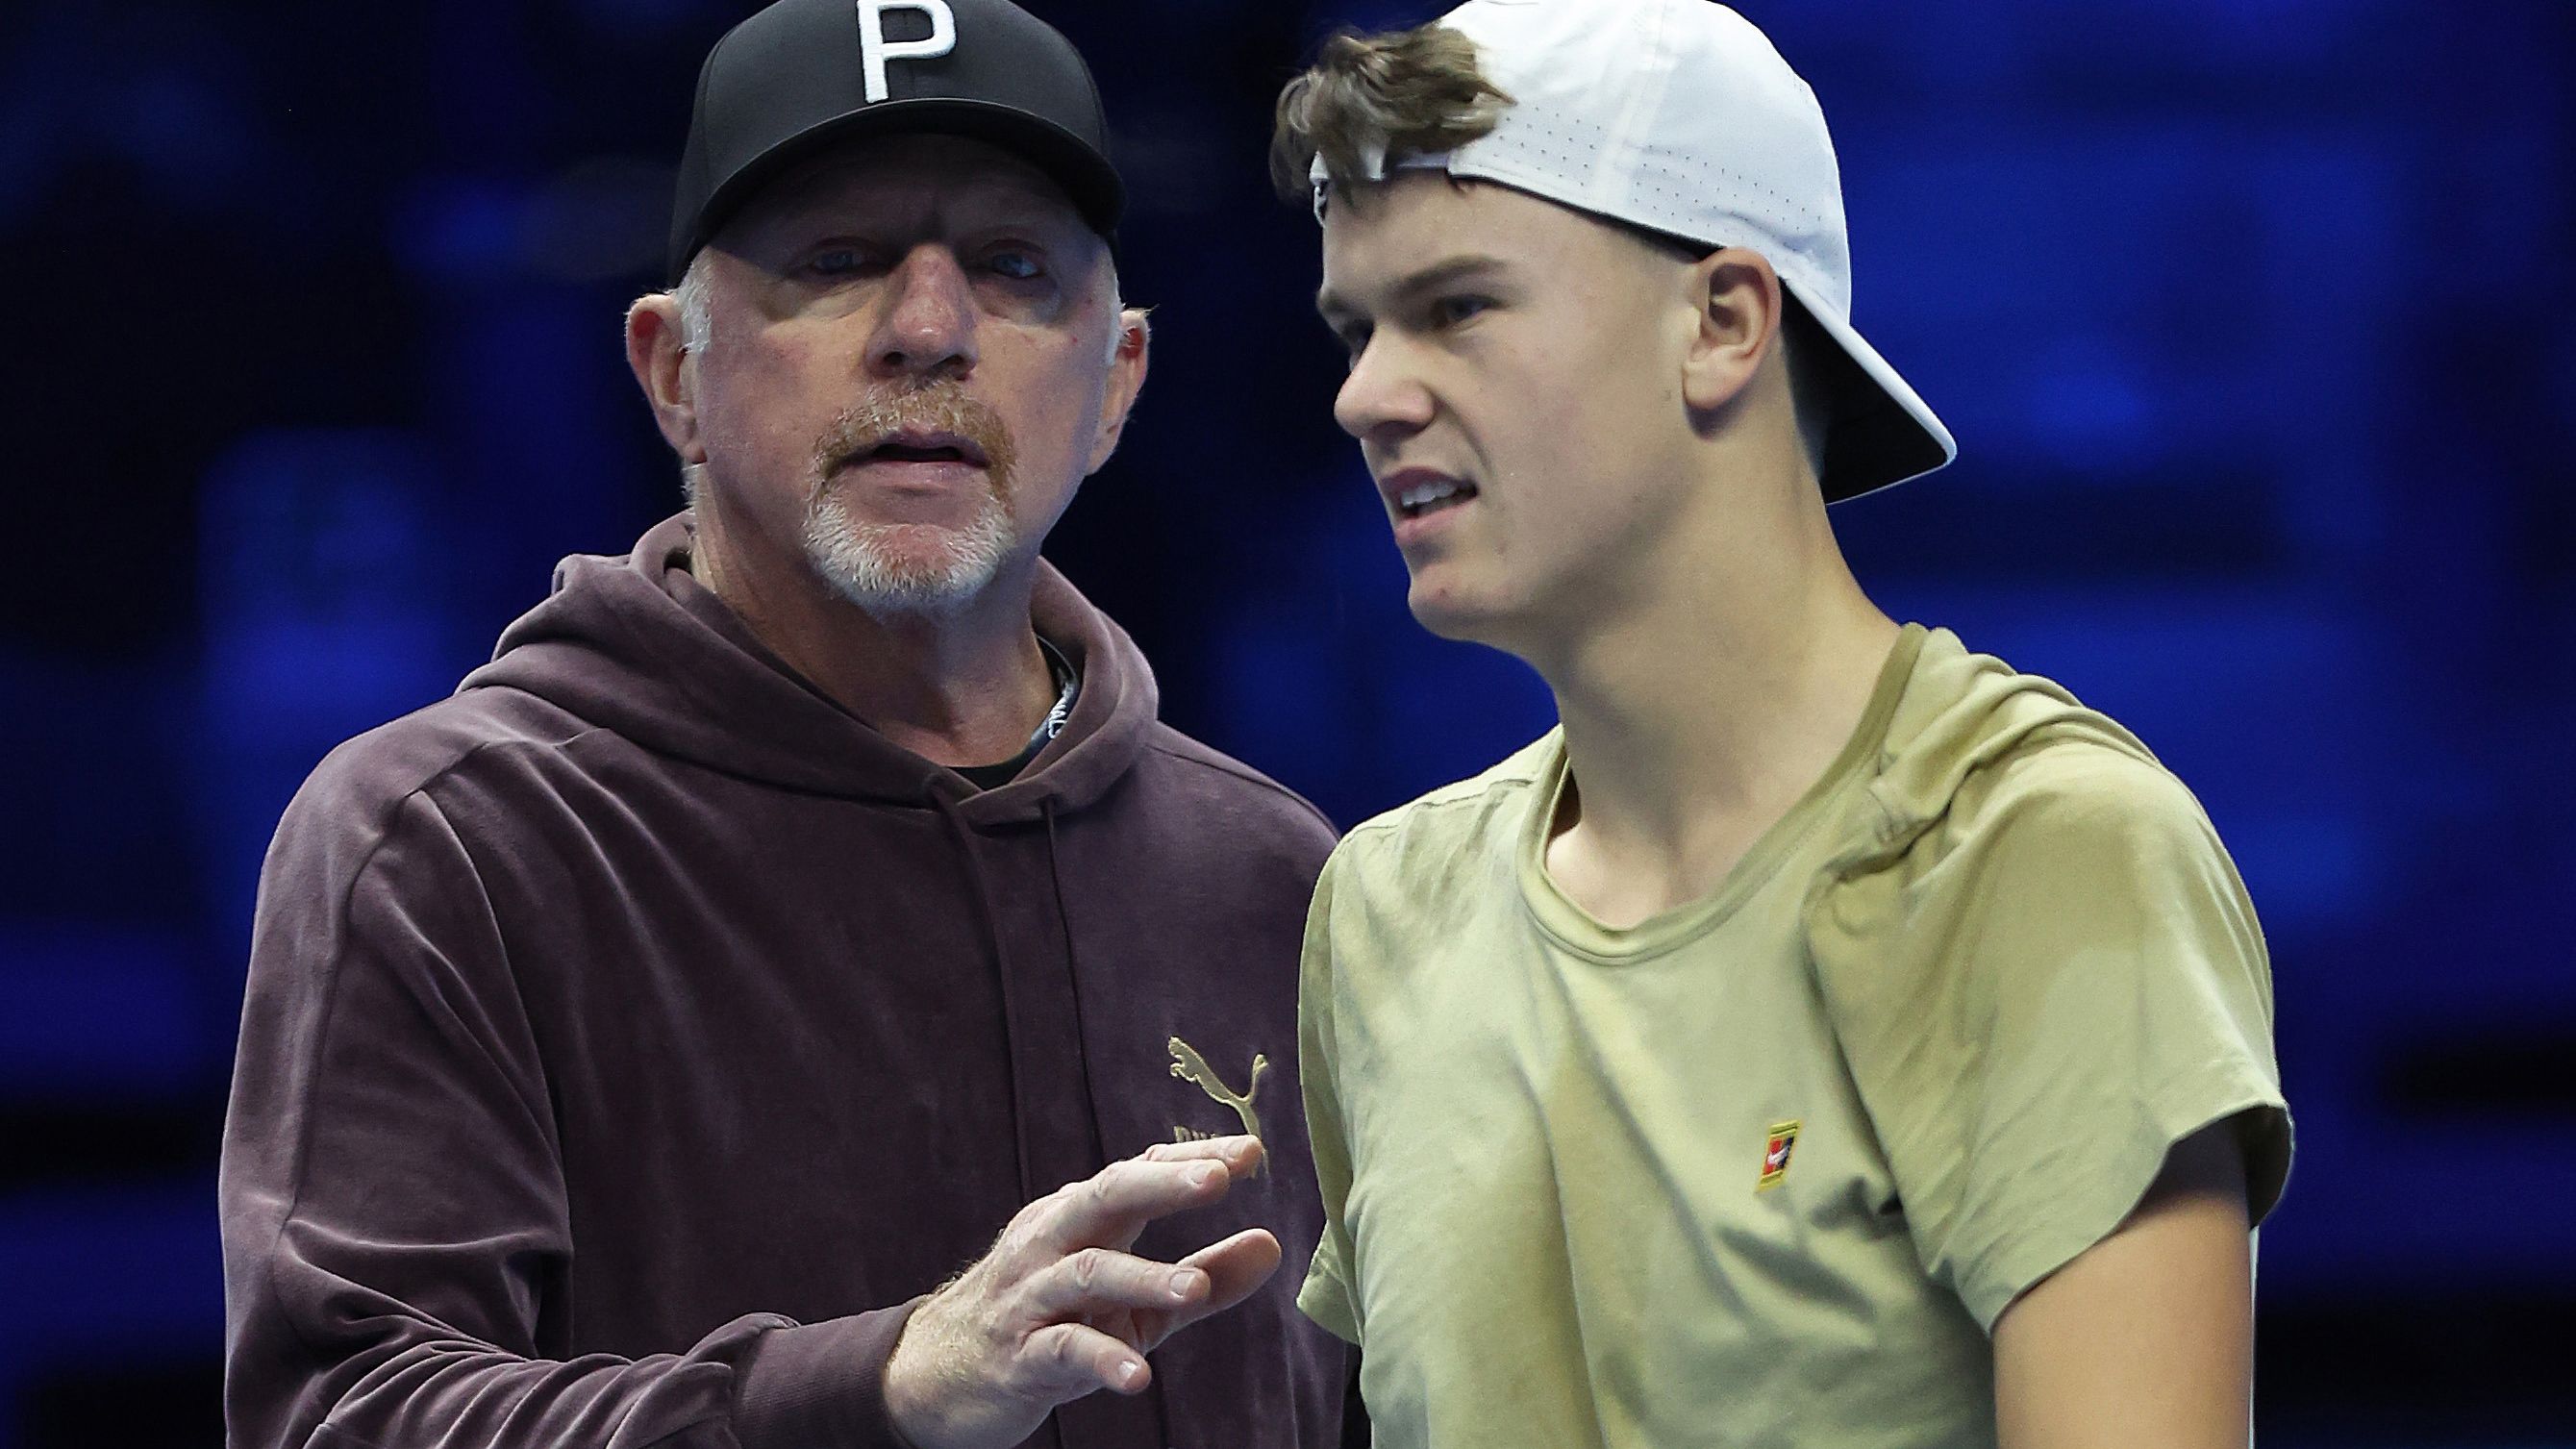 Coach Boris Becker with Holger Rune of Denmark during a practice session prior to the ATP Finals at Pala Alpitour in Turin.